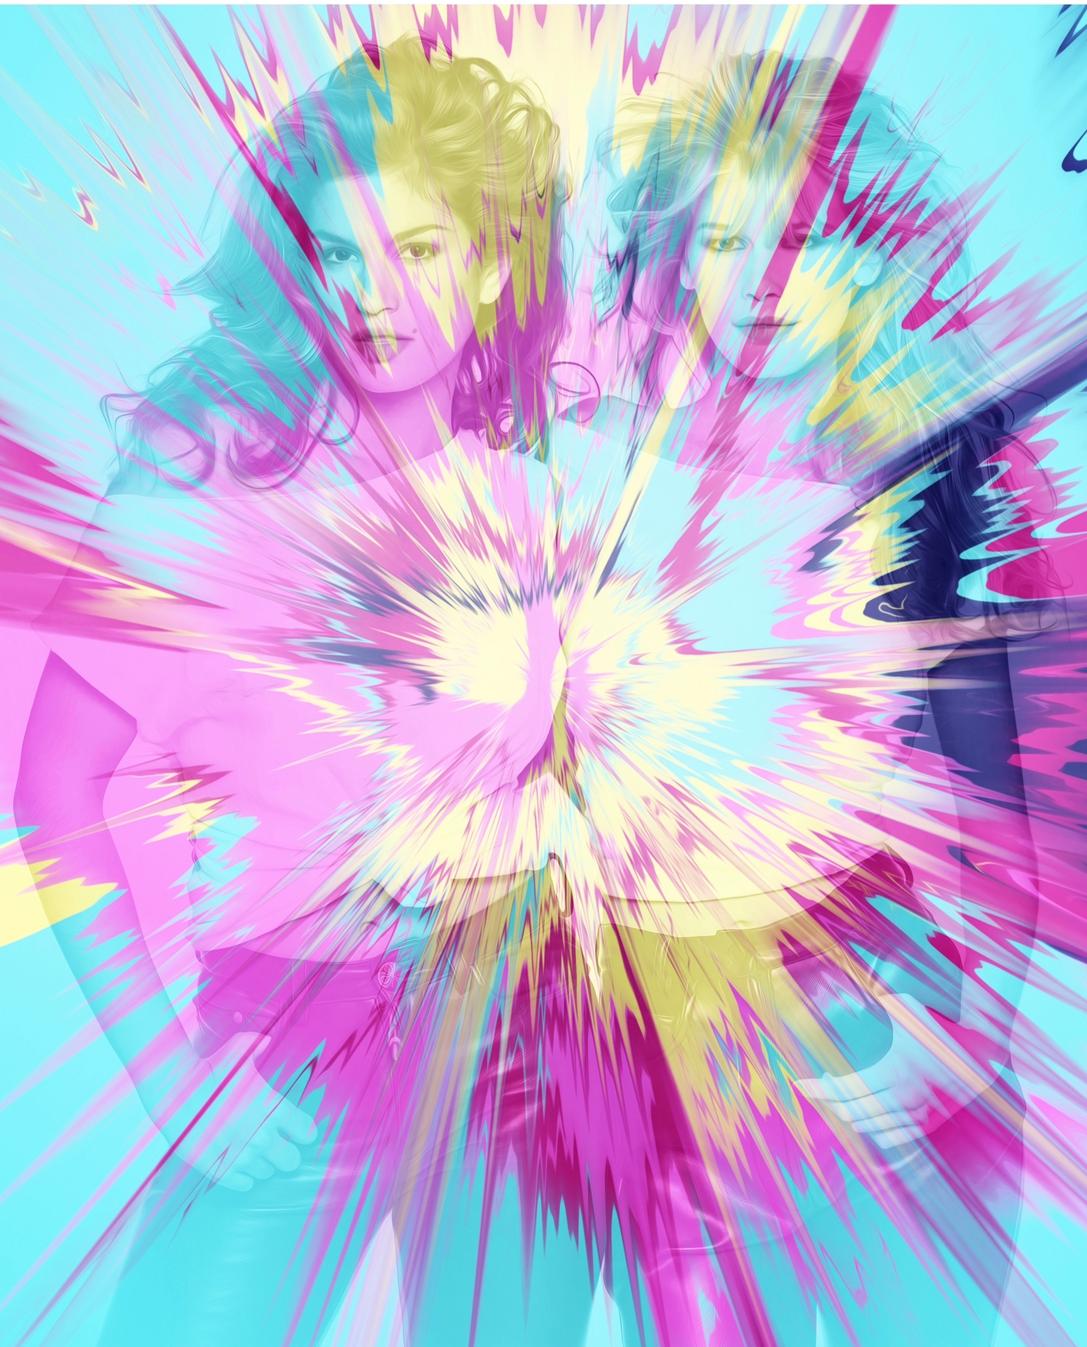 542 - Cindy Crawford + Claudia Schiffer with Diamond Dust - Mixed Media Art by Punk Me Tender